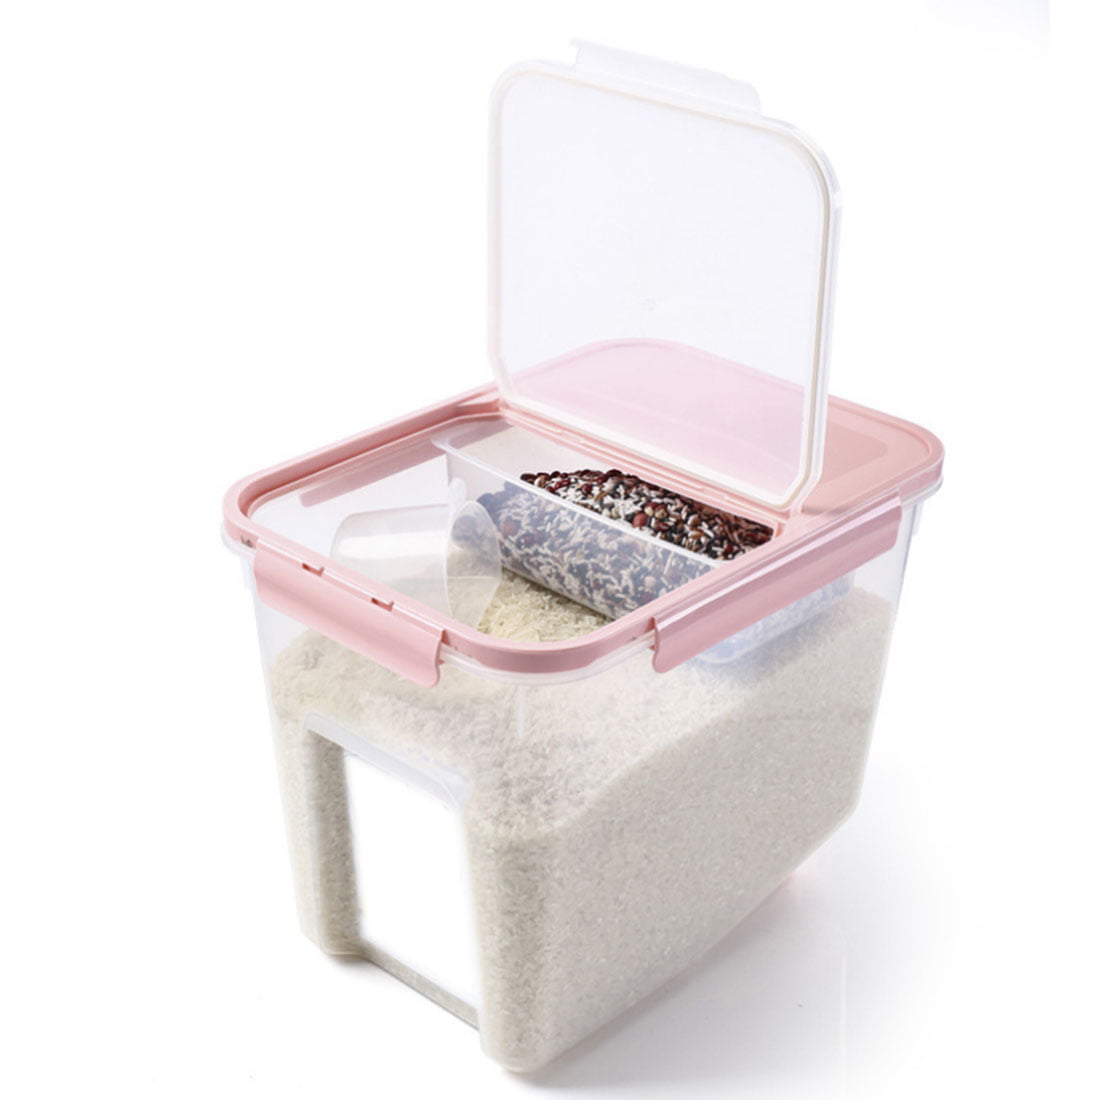 33.5 LuoKe Rice Storage Container 10KG Plastic Sealed Moistureproof Mothproof Cereals Beans Storage Container with Measuring Cup 23.5 27cm 